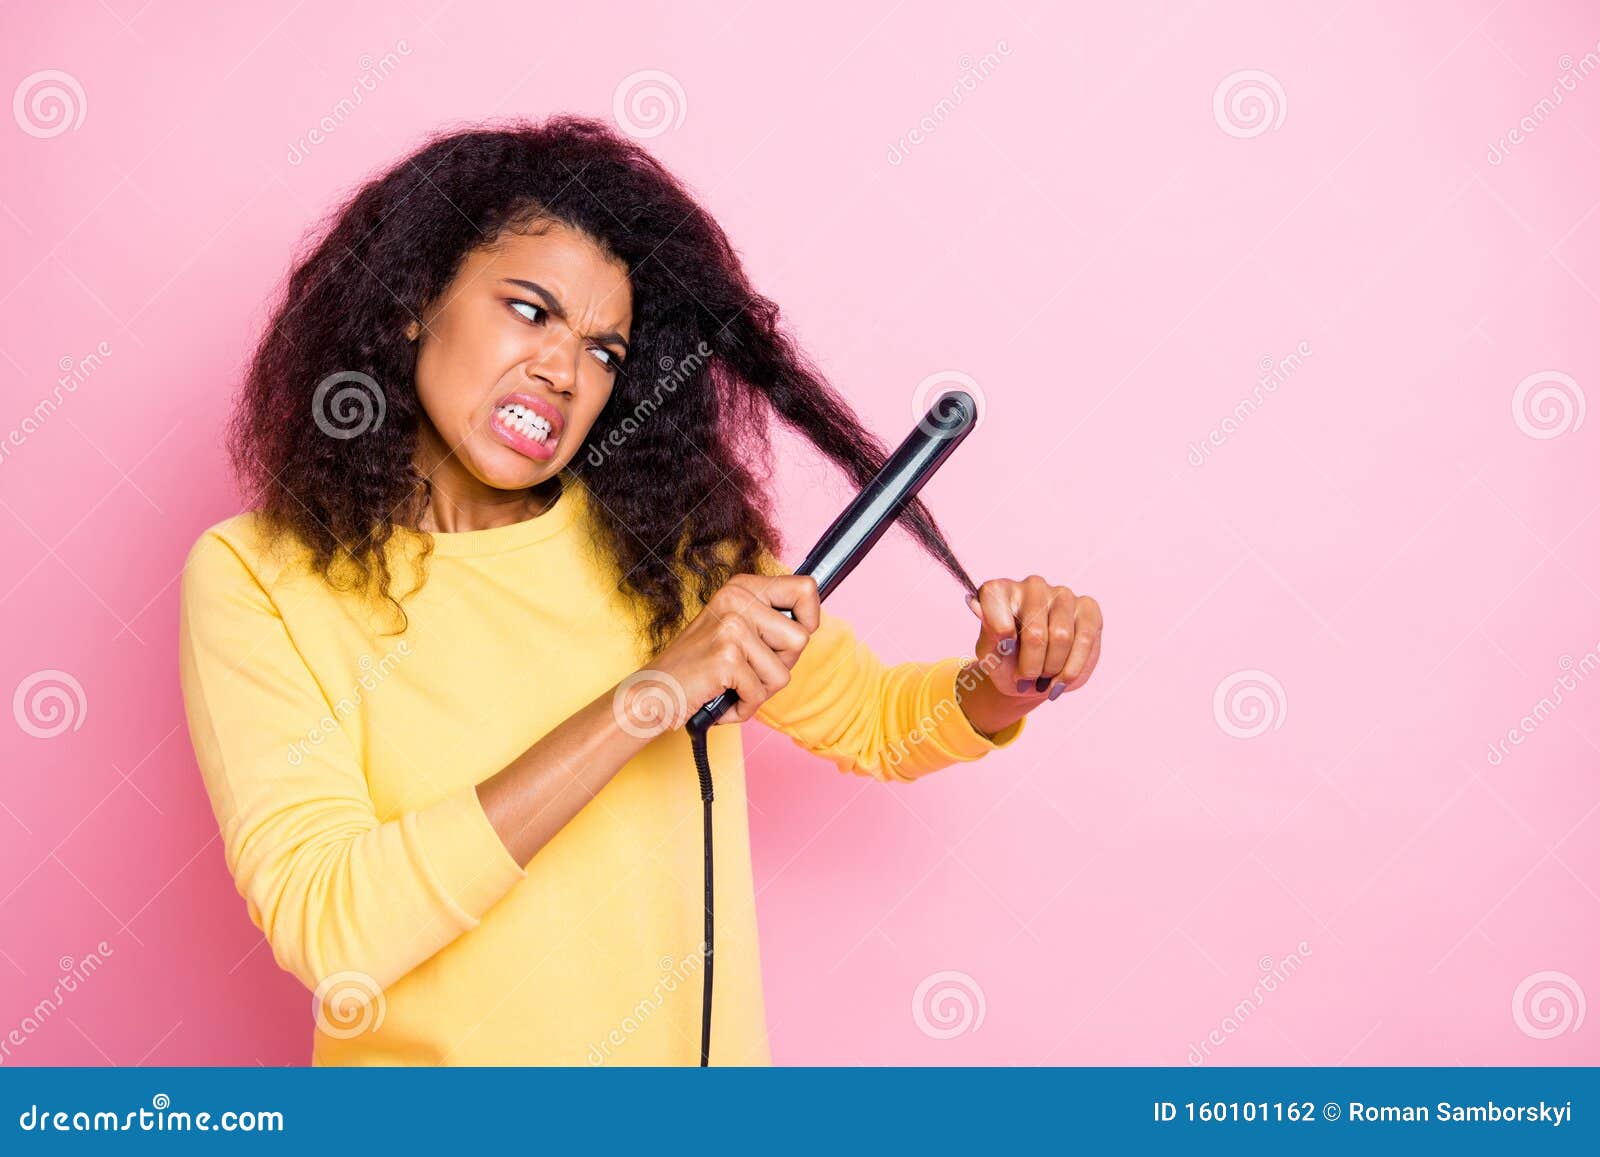 I Want Straight Haircut Concept. Close Up Photo of Annoyed Irritated with  Volume Thick Naturally Curly Hair Girl Using Stock Photo - Image of hairdo,  long: 160101162